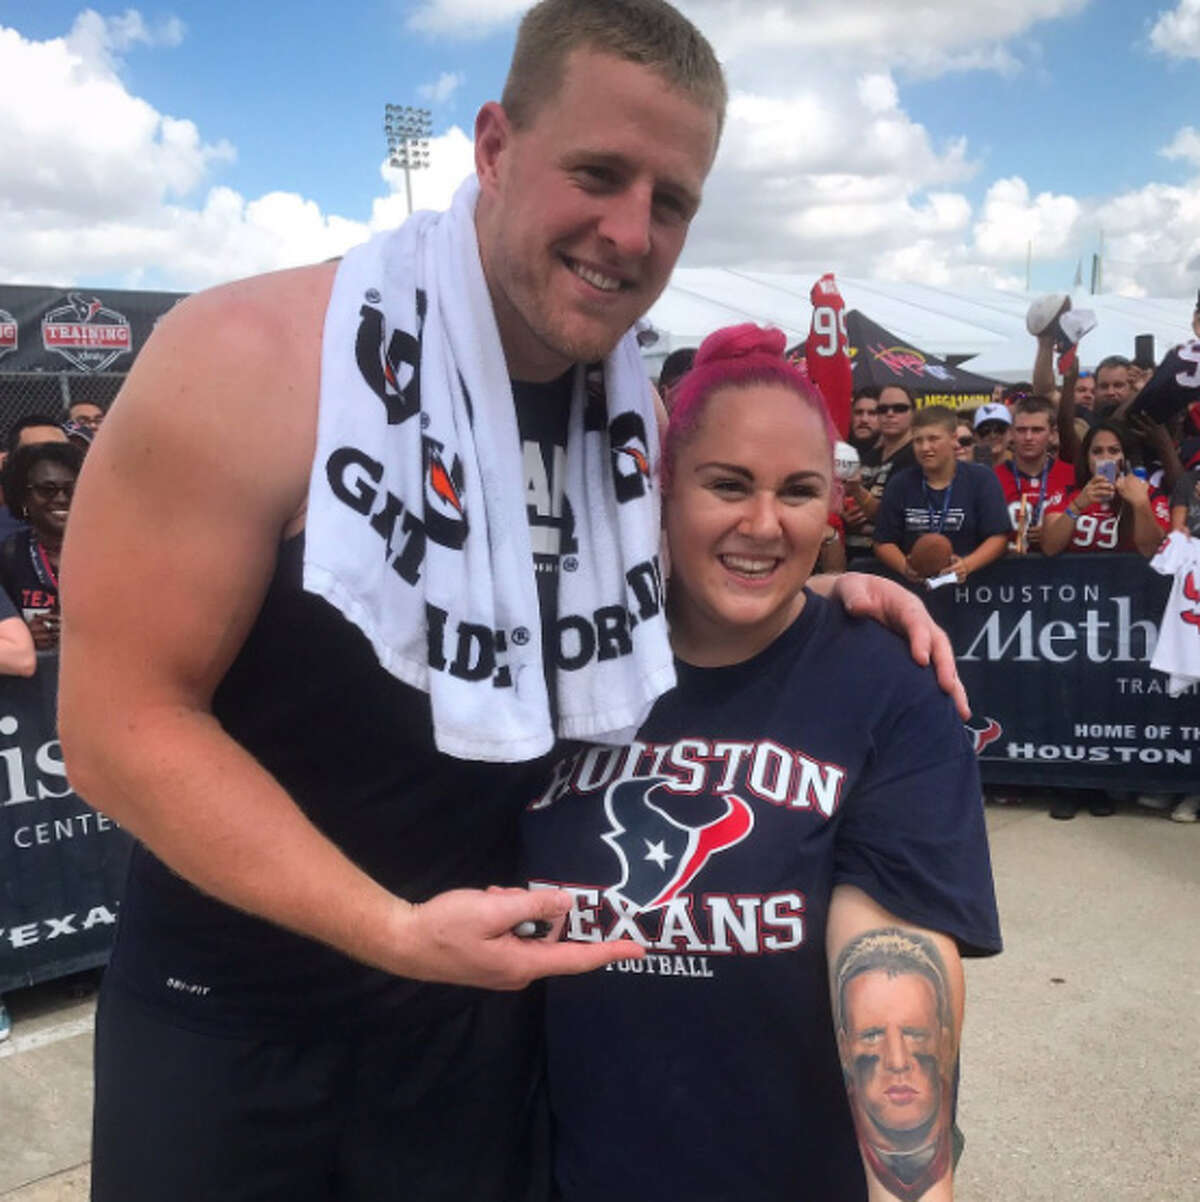 J.J. Watt met a Houston Texans fan that has his face tattooed on her forearm after practice Monday, Aug. 21, 2017.